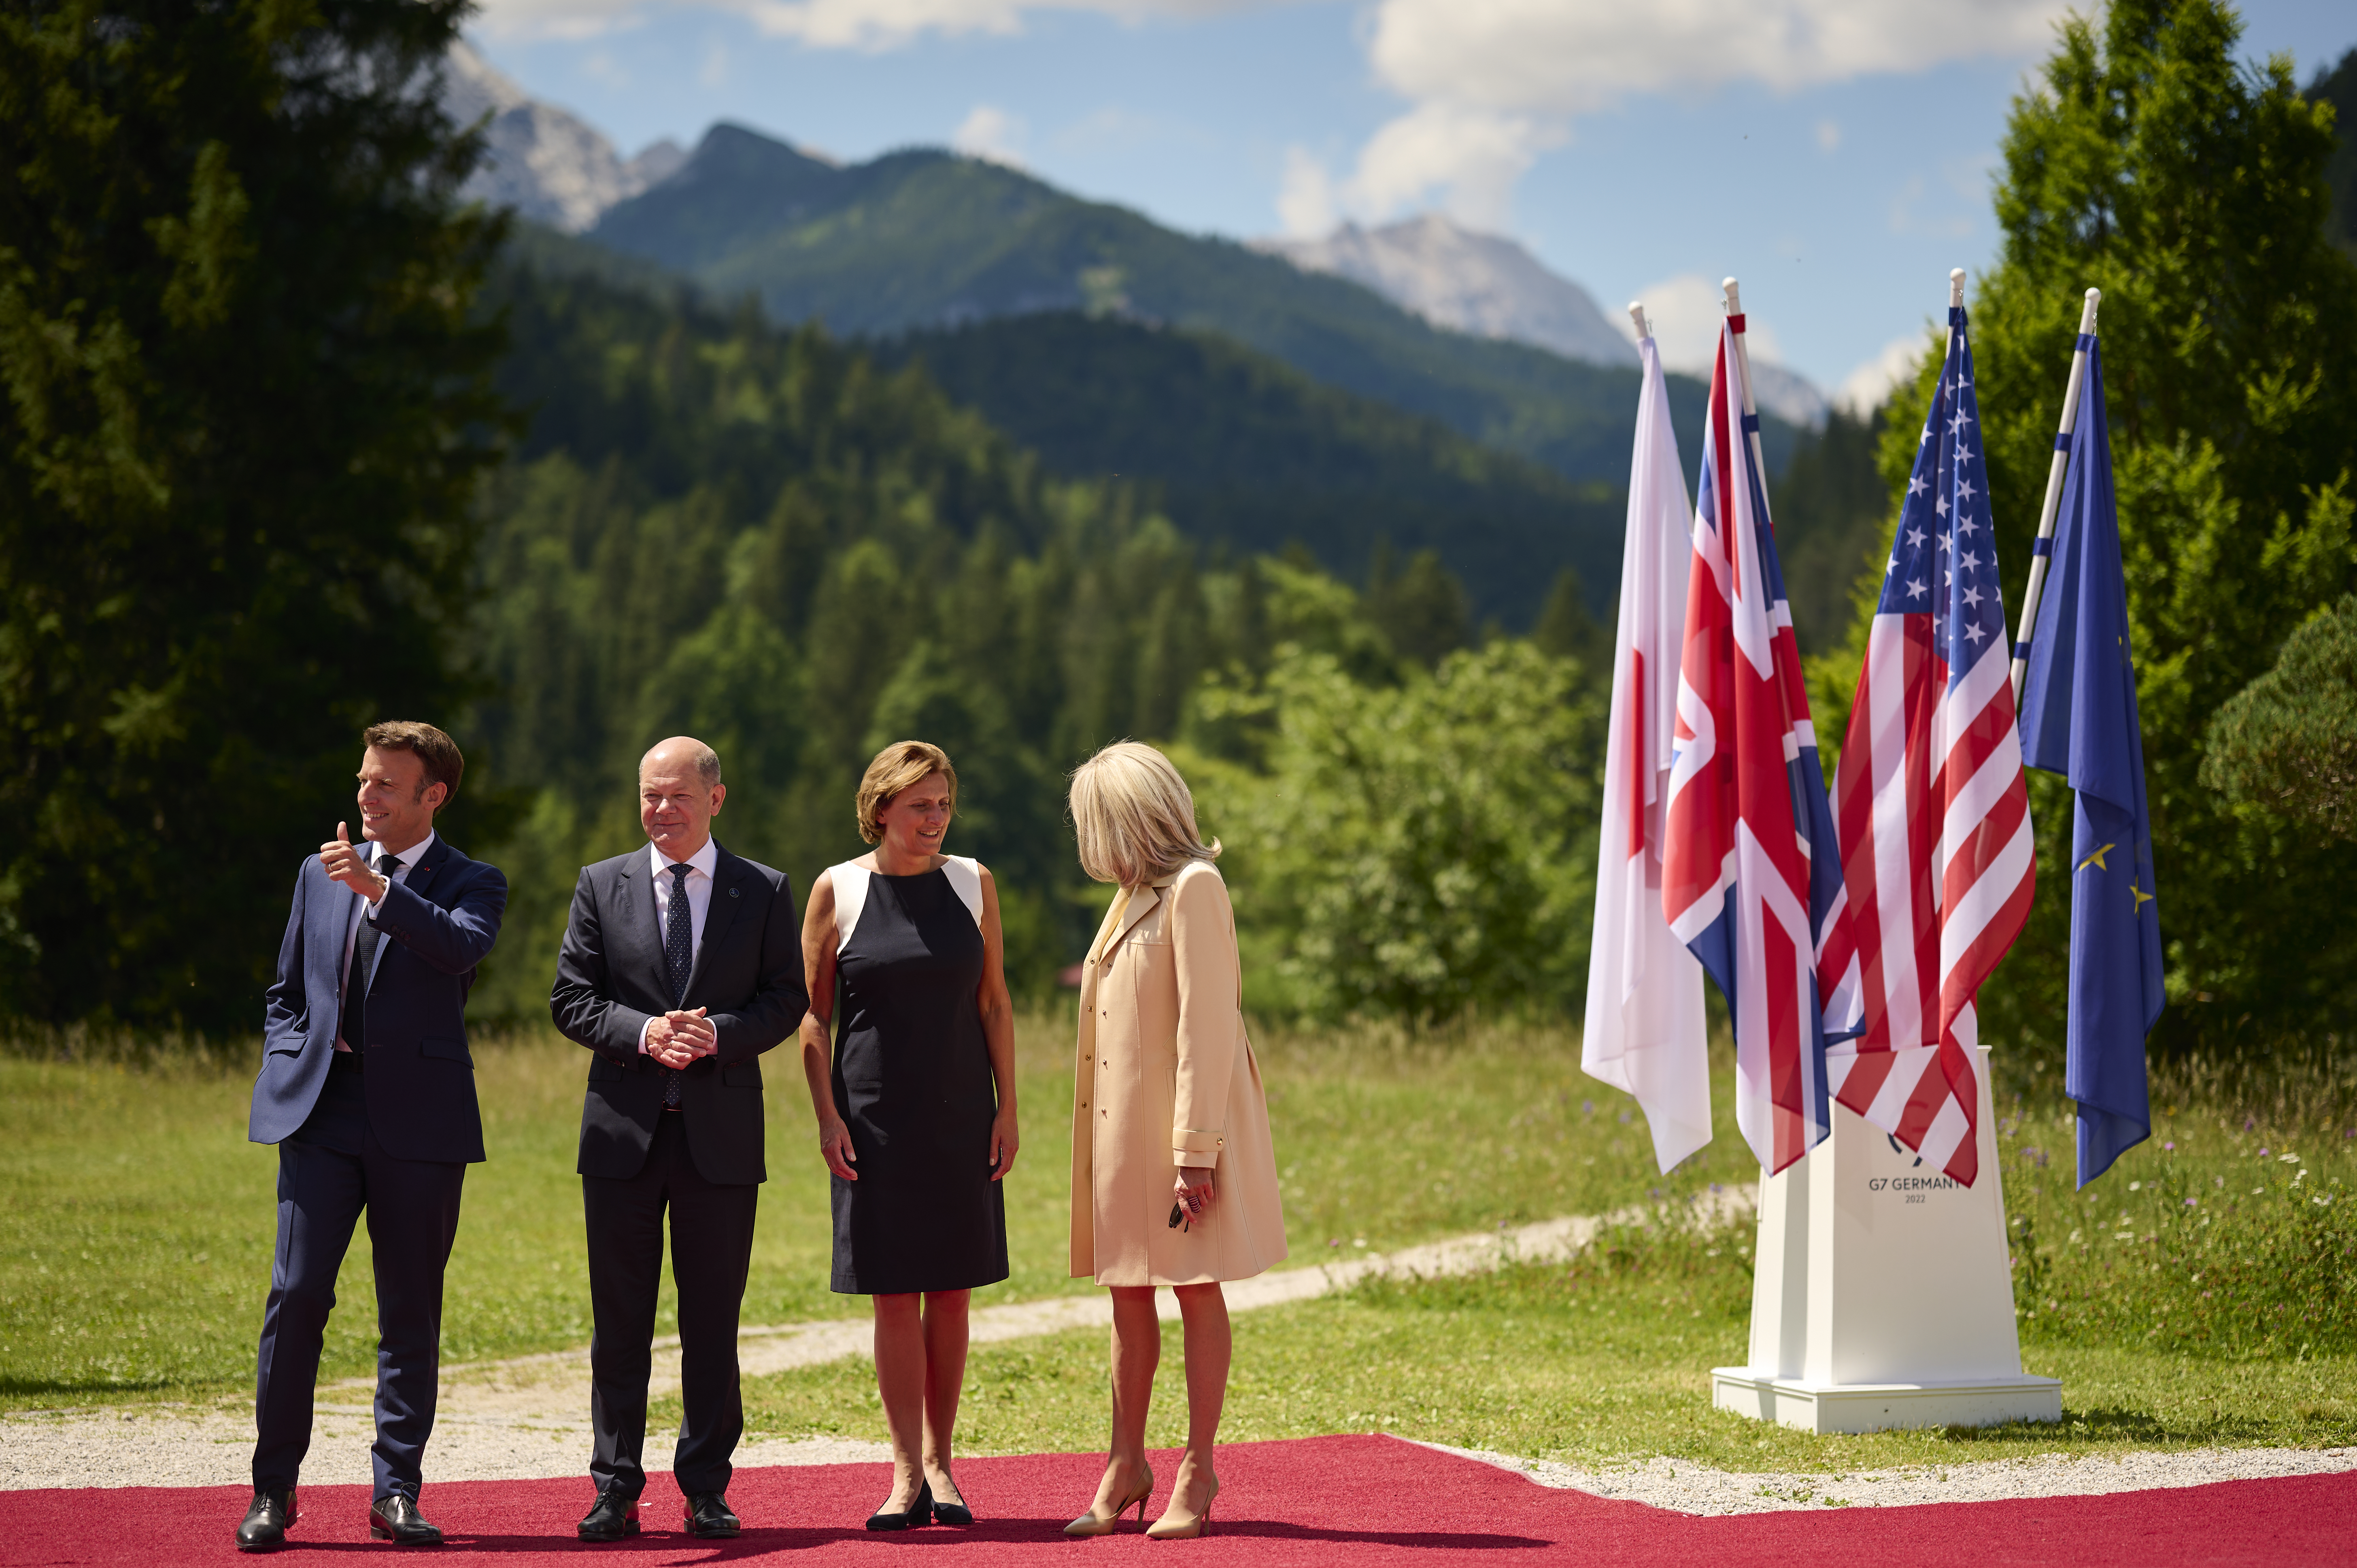 Federal Chancellor Olaf Scholz and his wife Britta Ernst welcome Emmanuel Macron (French President) and his wife Brigitte to the G7 Summit in Schloss Elmau.